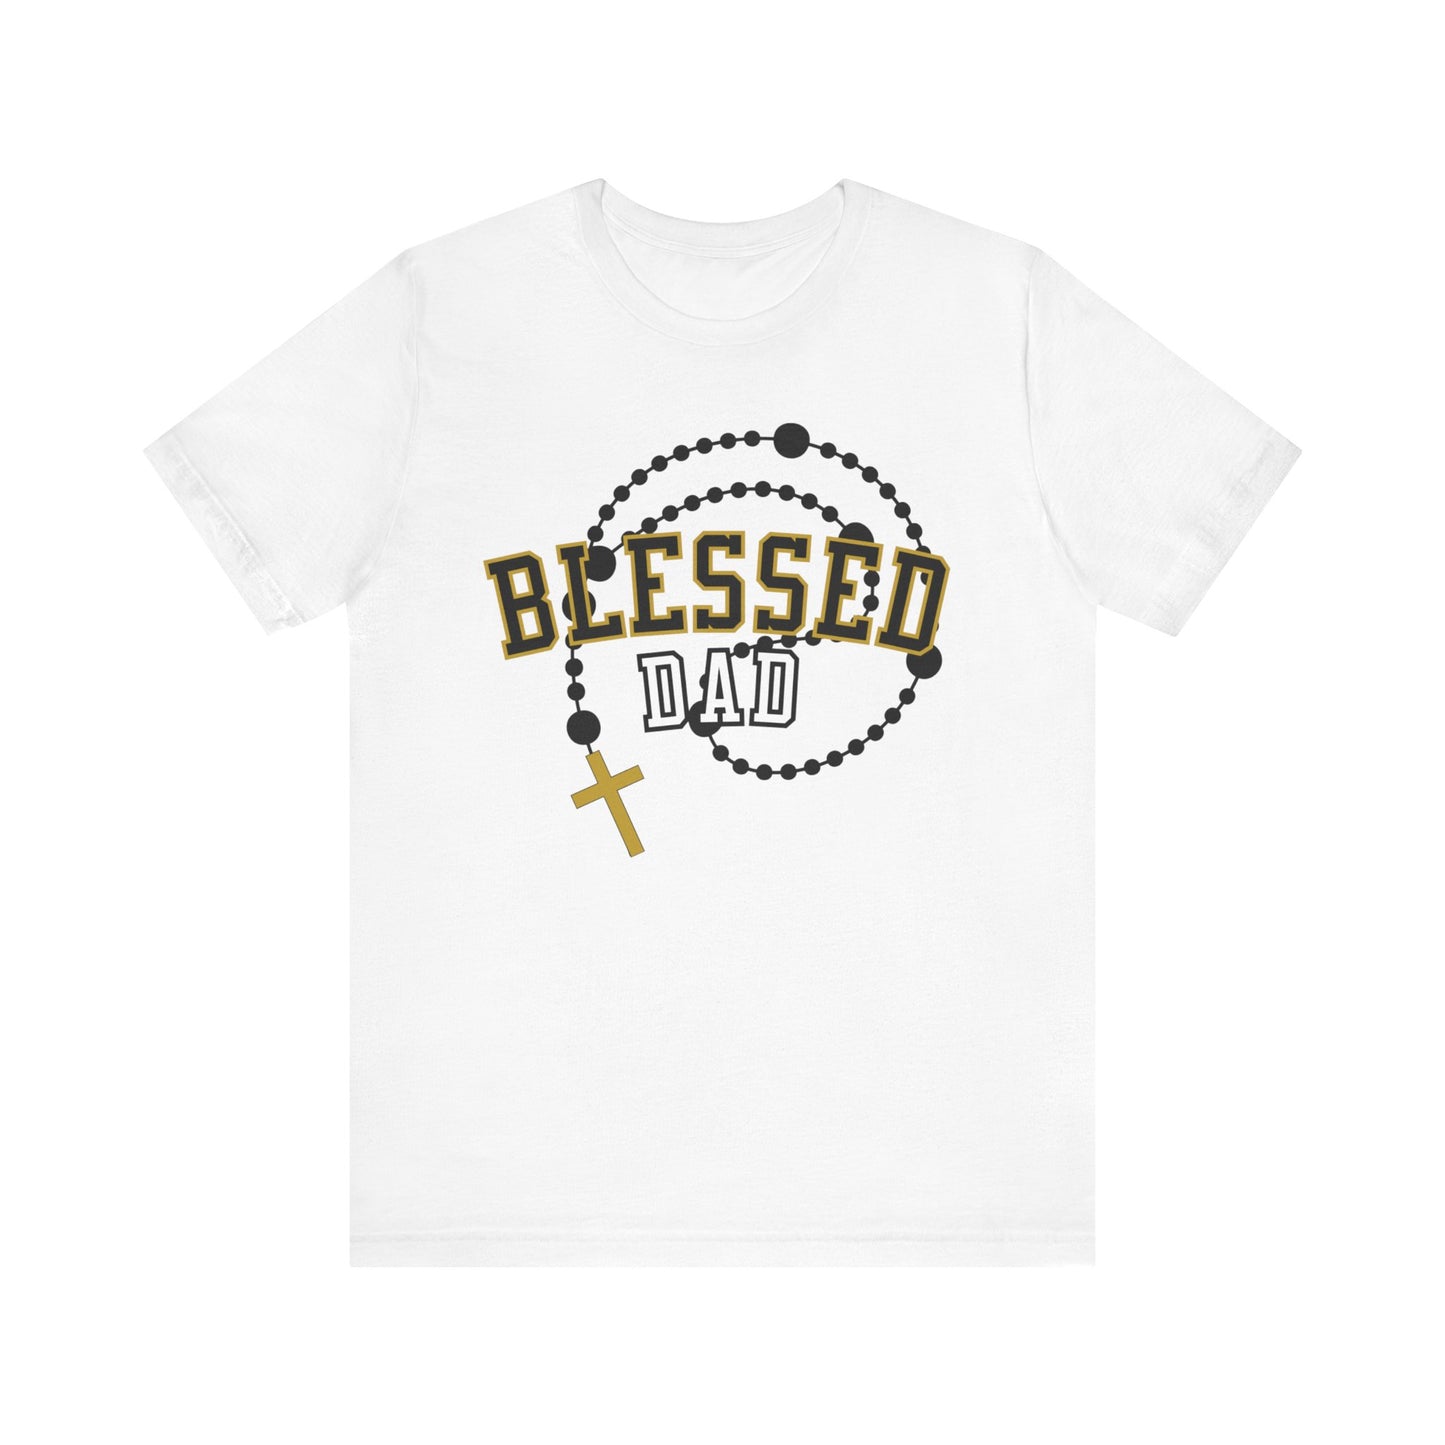 Devoted Dad Tee - White